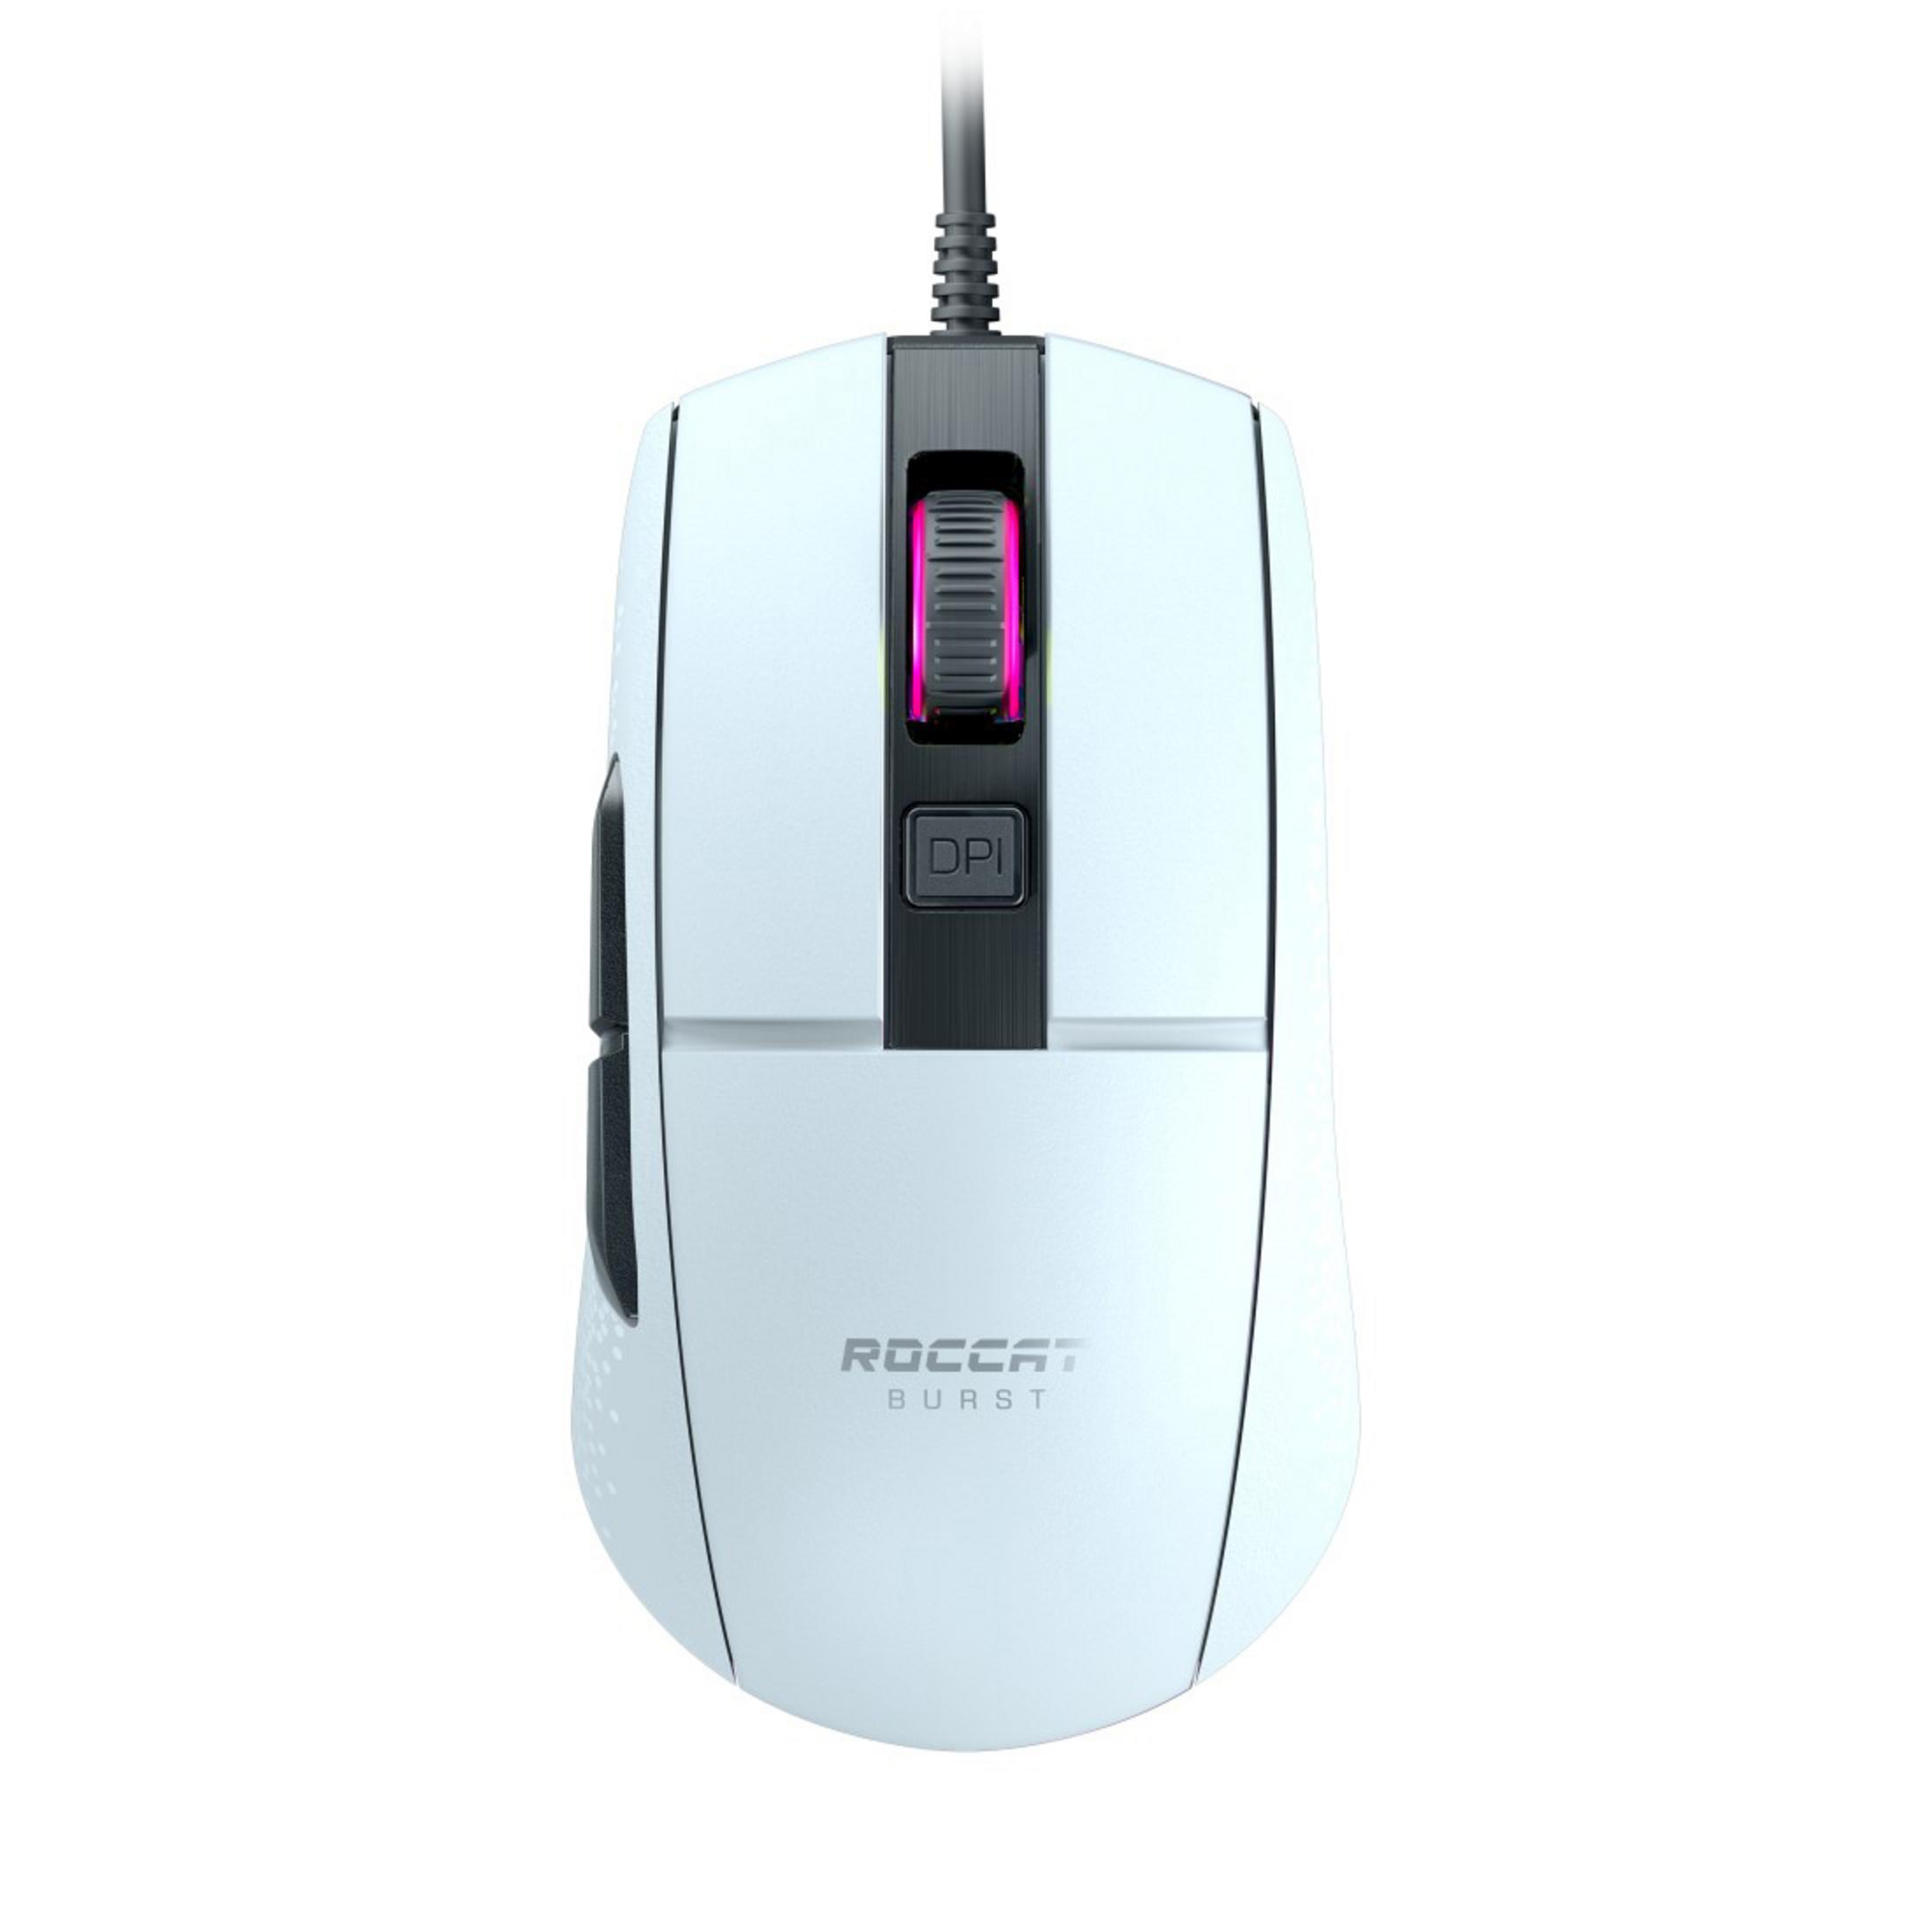 ROC-11-751 Gaming Weiß ROCCAT WI BURST Maus, CORE MOUSE